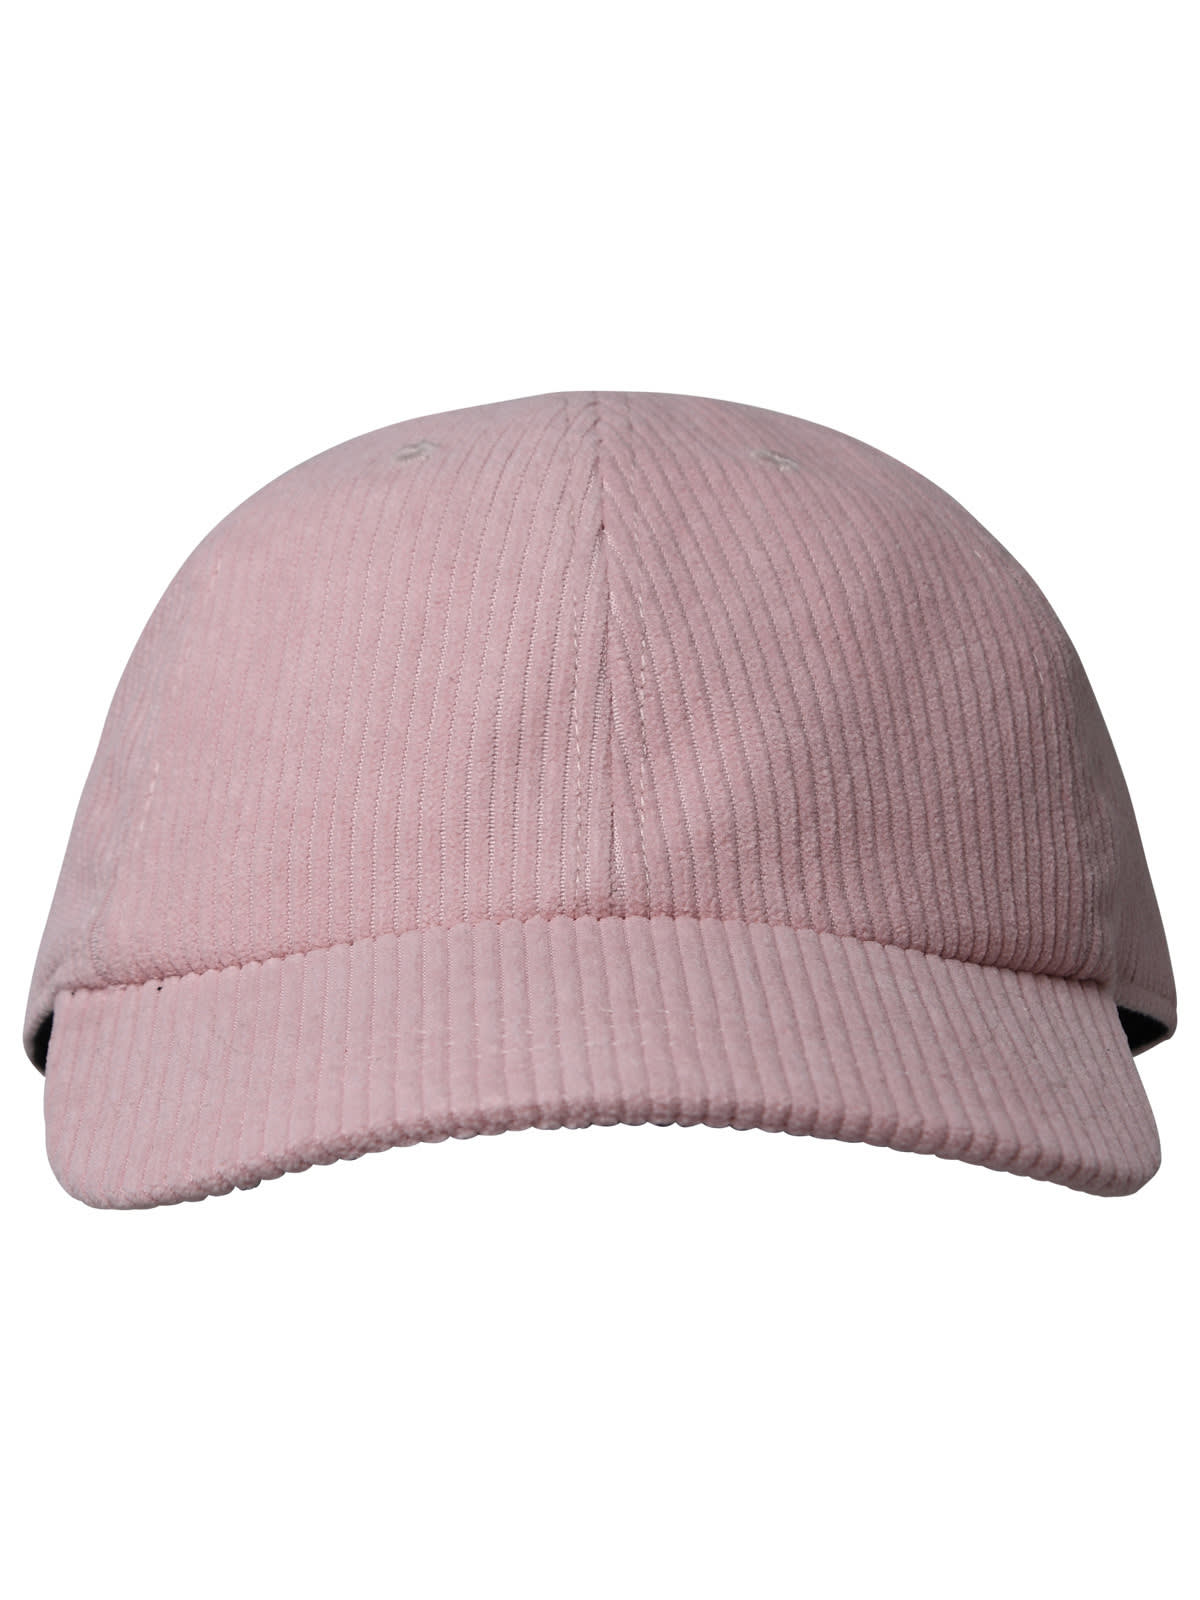 AUTRY PINK CORDUROY BASEBALL CAP WITH LOGO